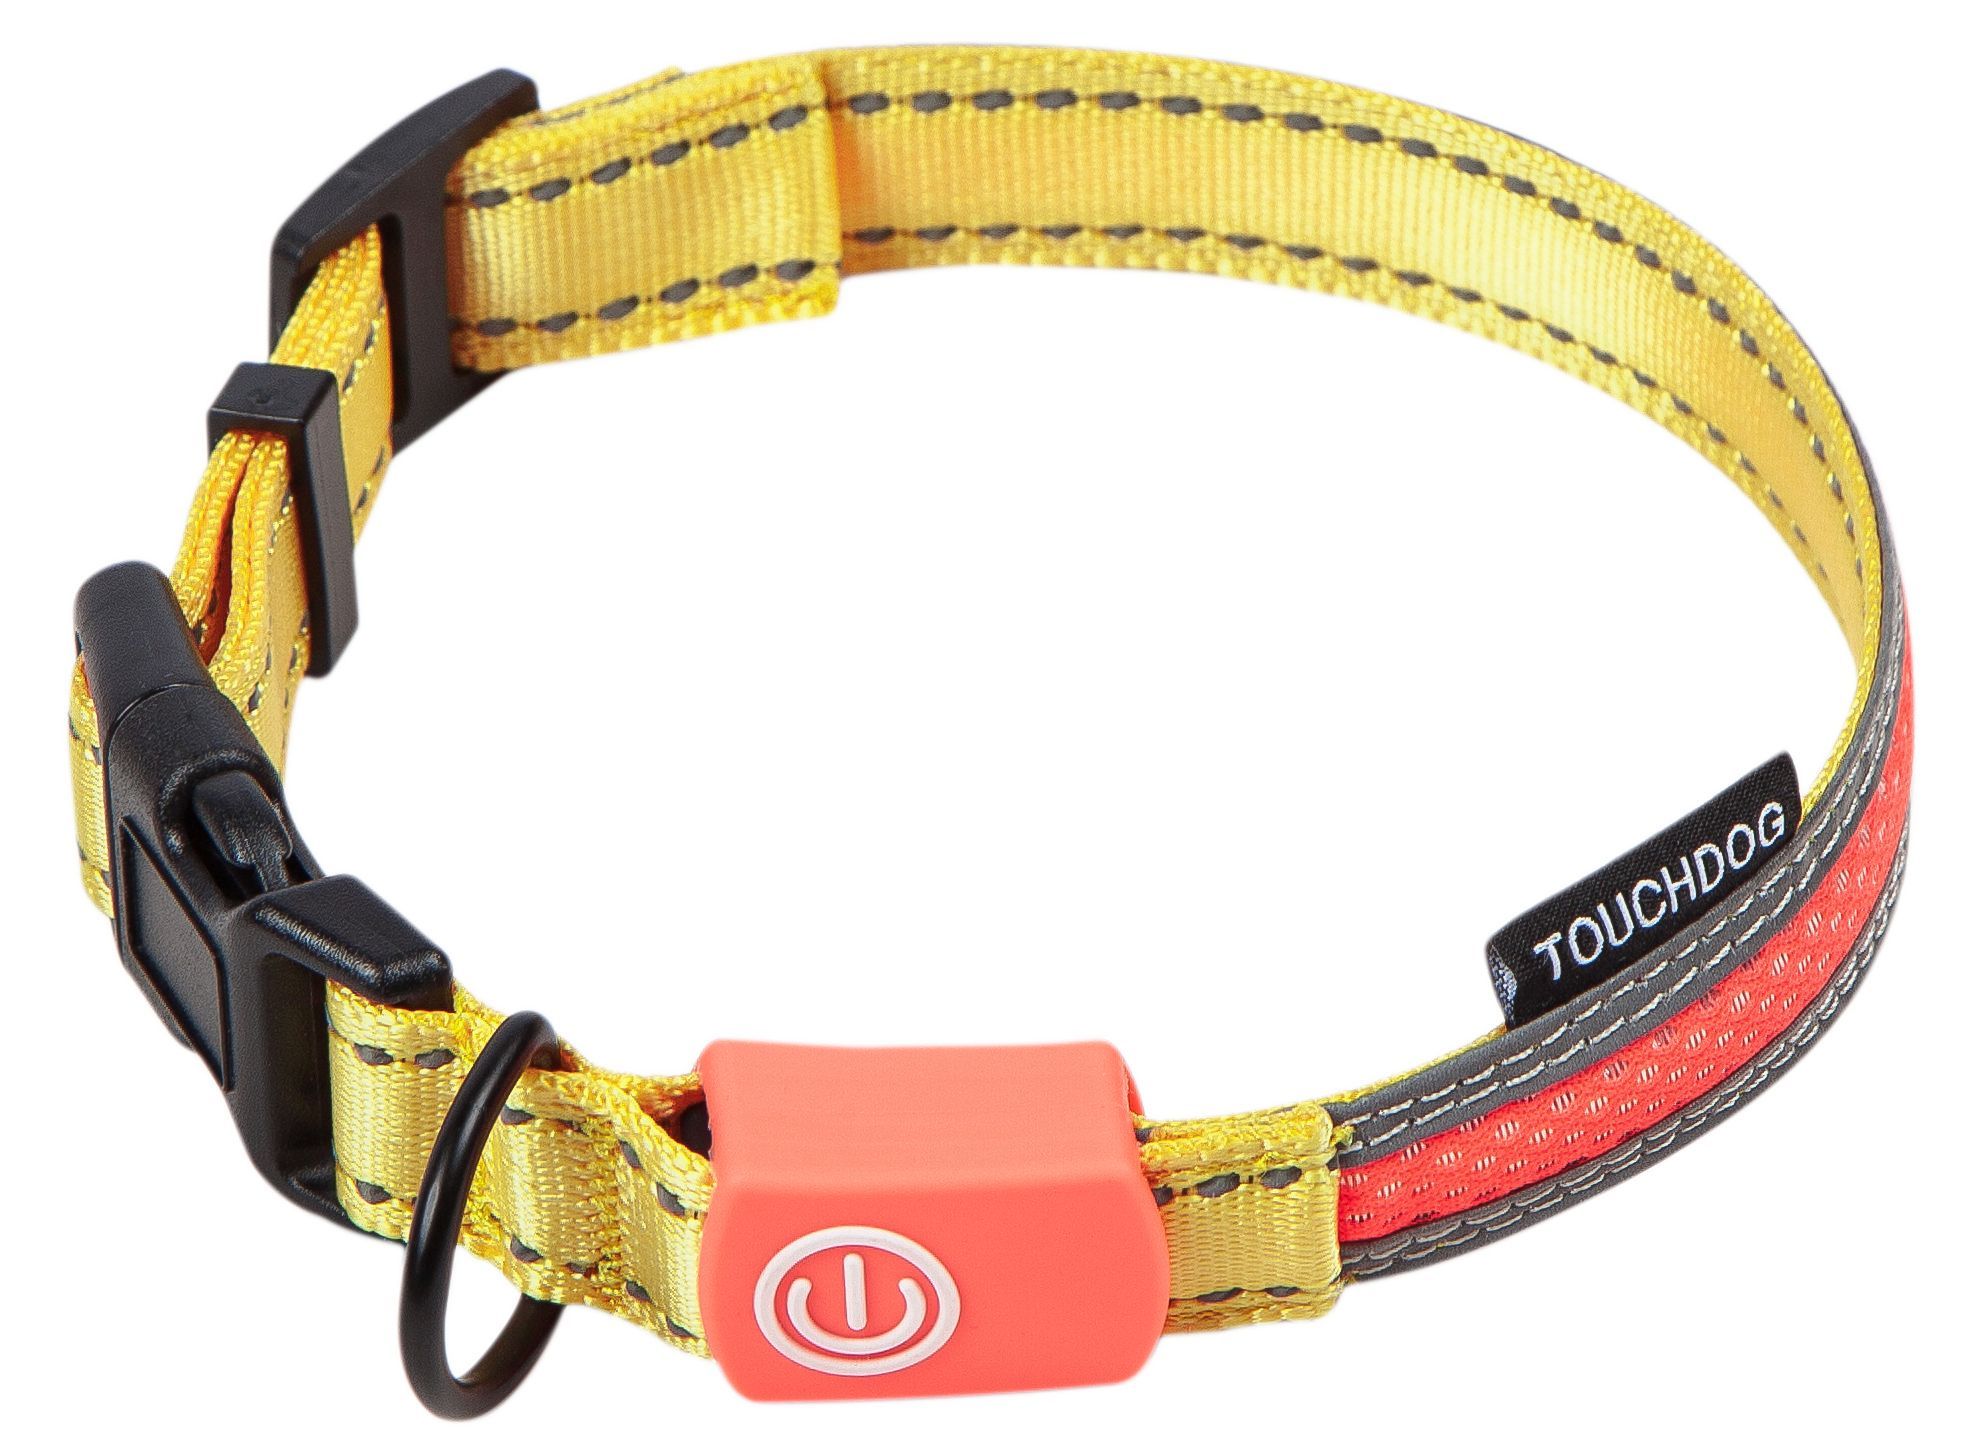 Touchdog ®'Lumiglow' 2-in-1 USB Charging LED Lighting Water-Resistant Dog Leash and Collar  